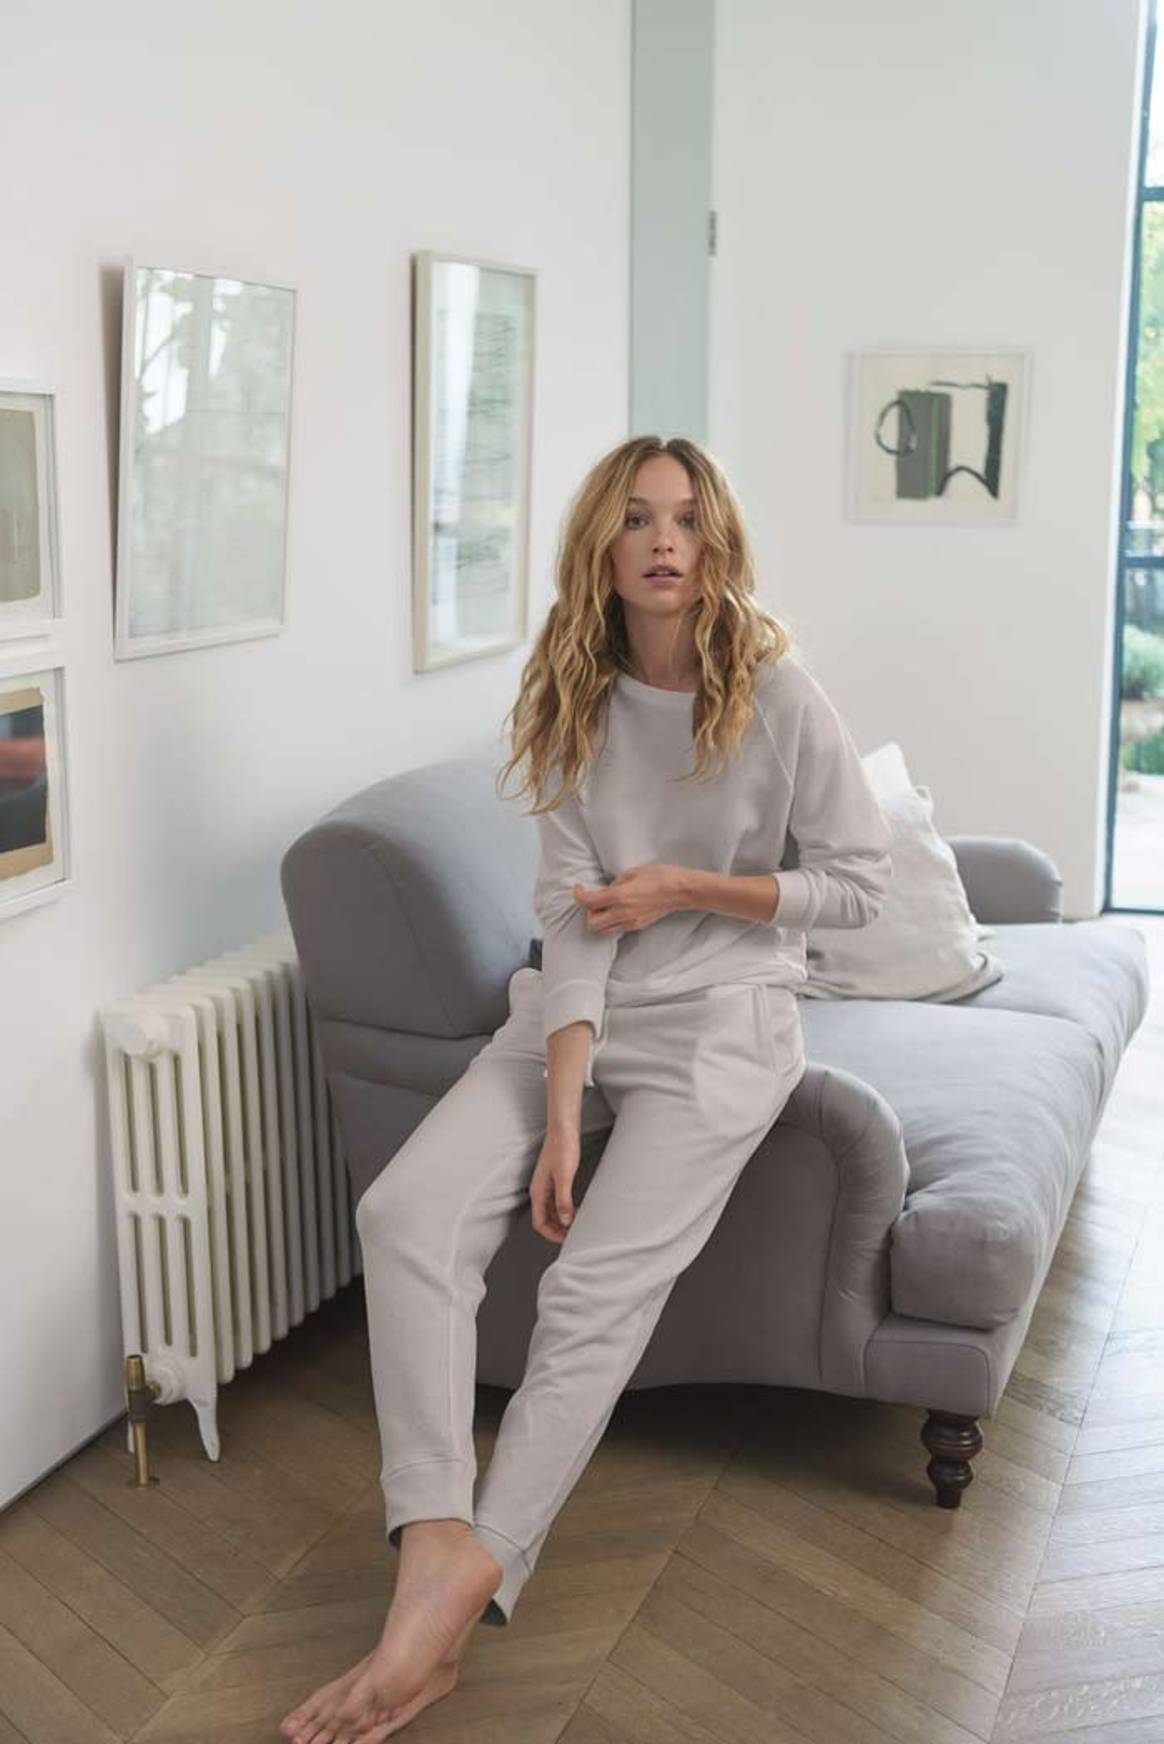 The White Company to create “statement store”